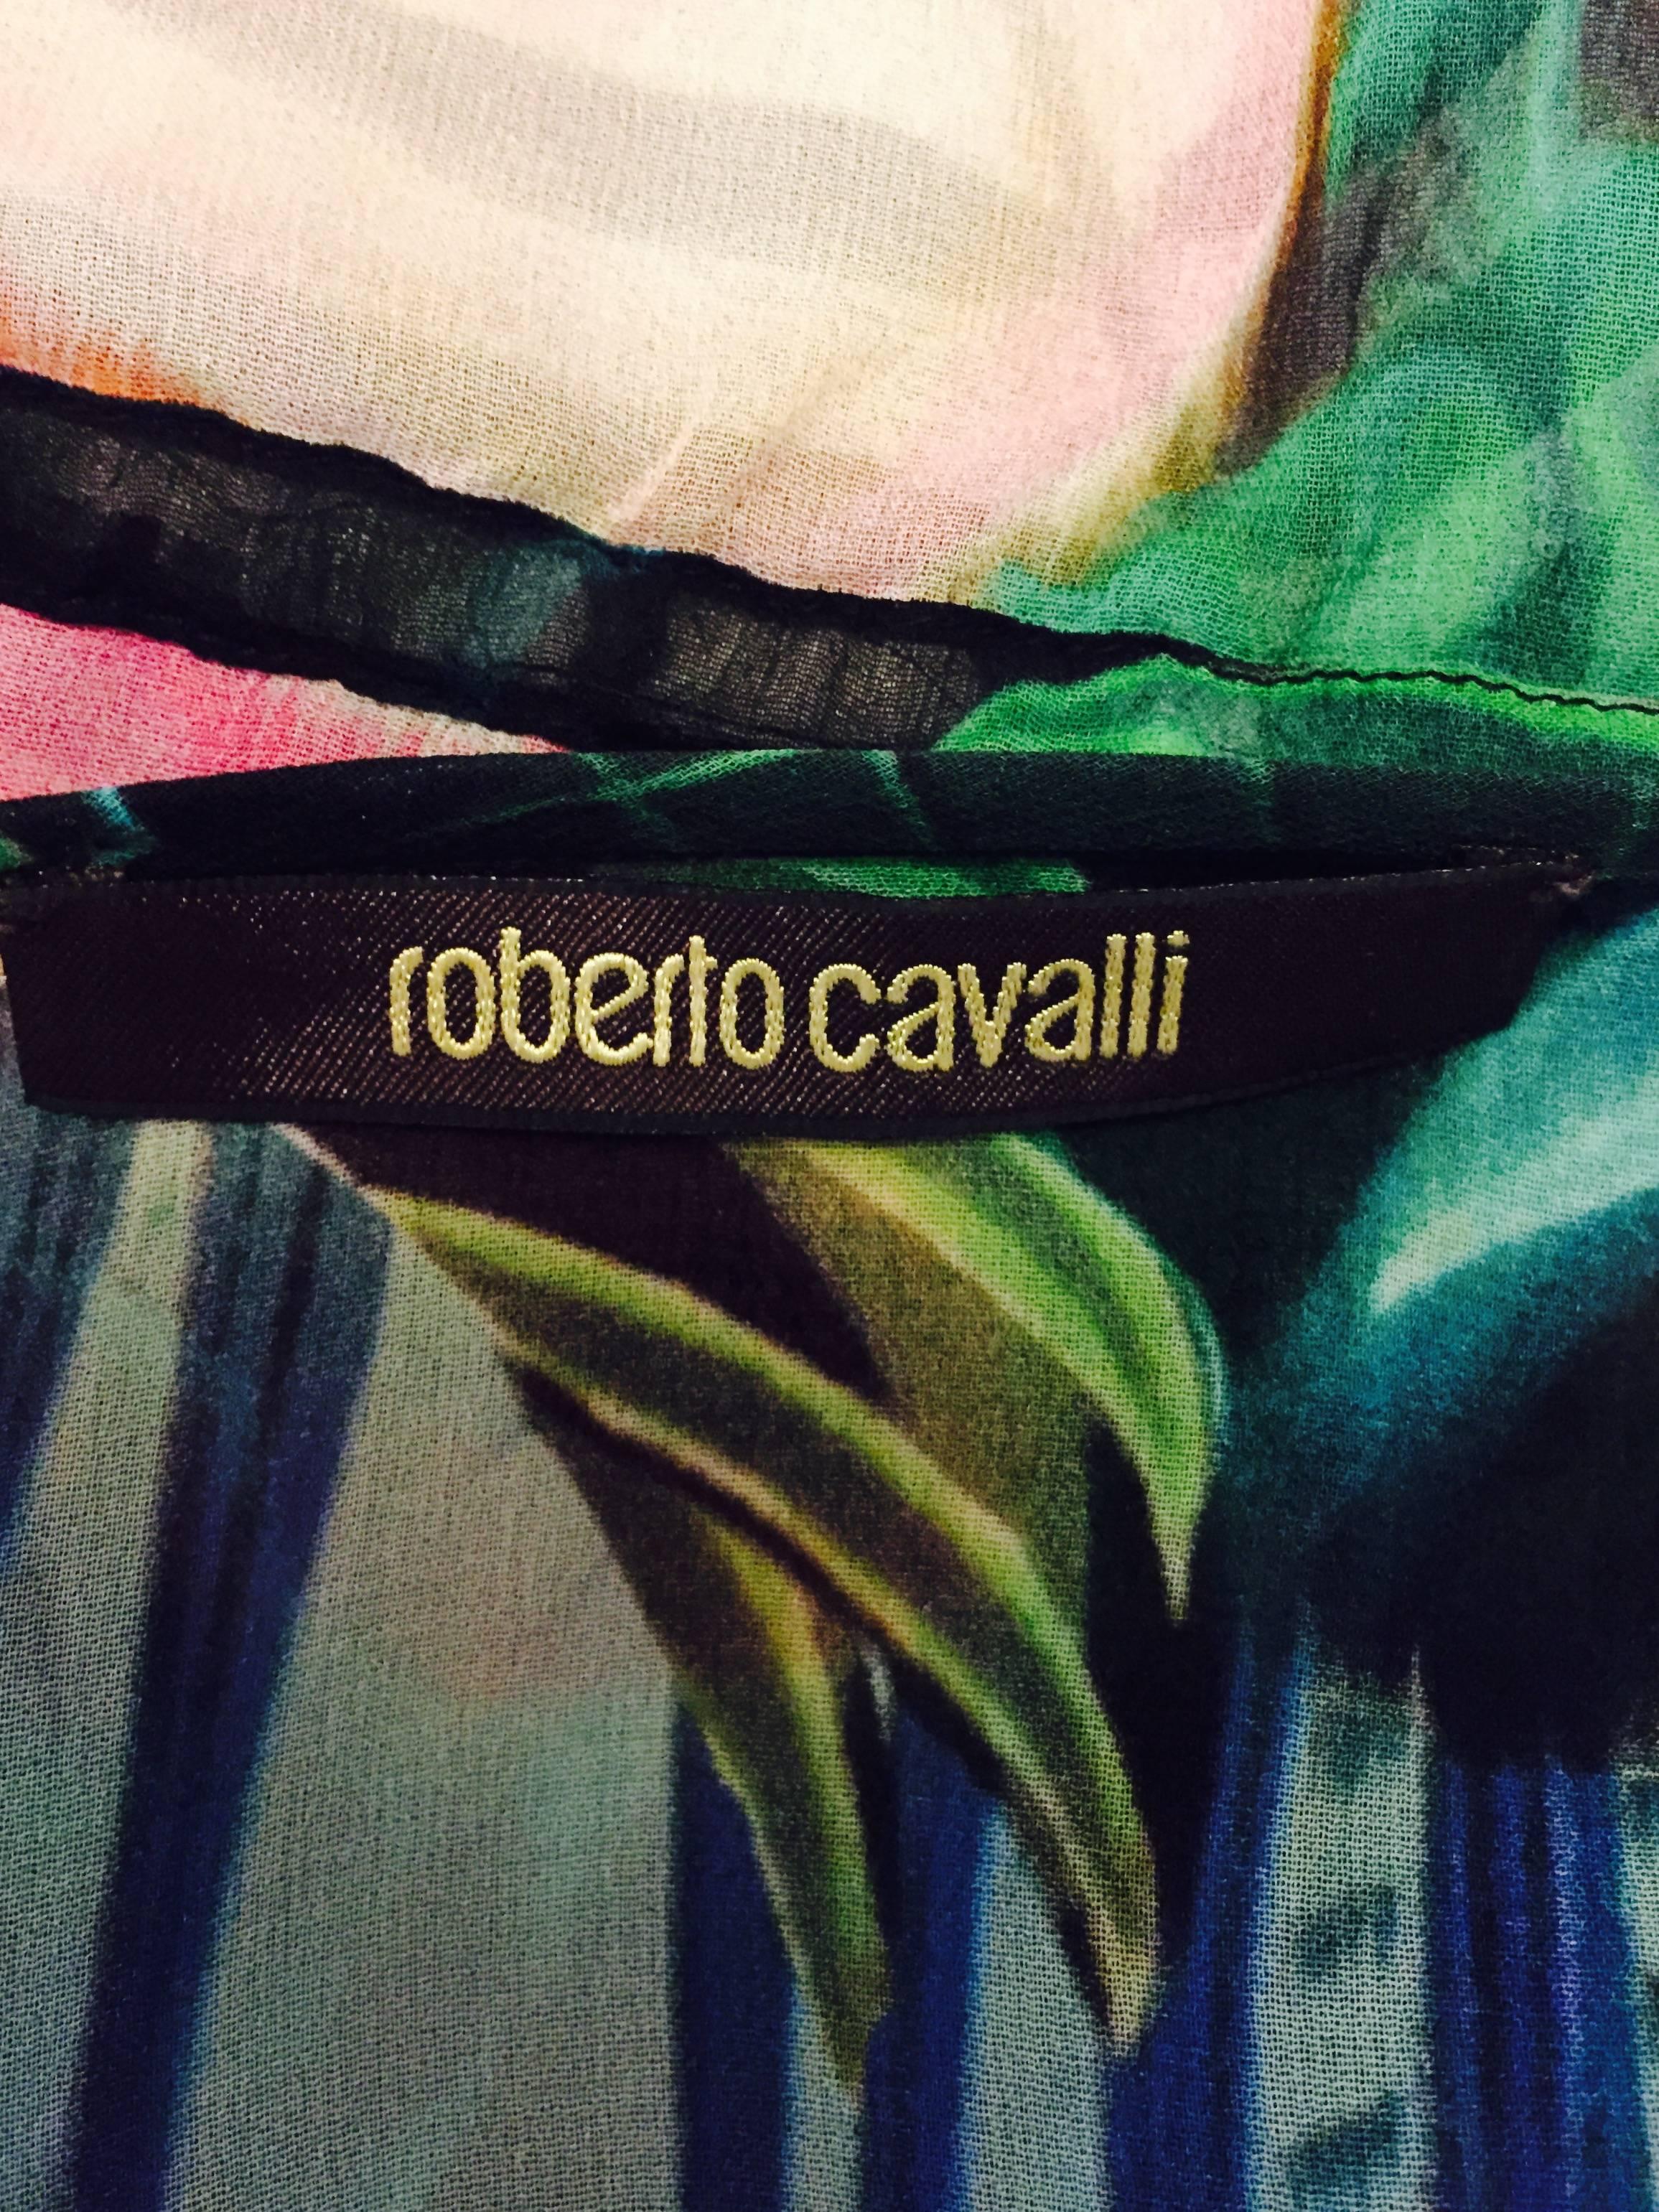 Radiant Roberto Cavalli Paradise Print Sheer Silk Tunic Blouse  In Excellent Condition In Palm Beach, FL